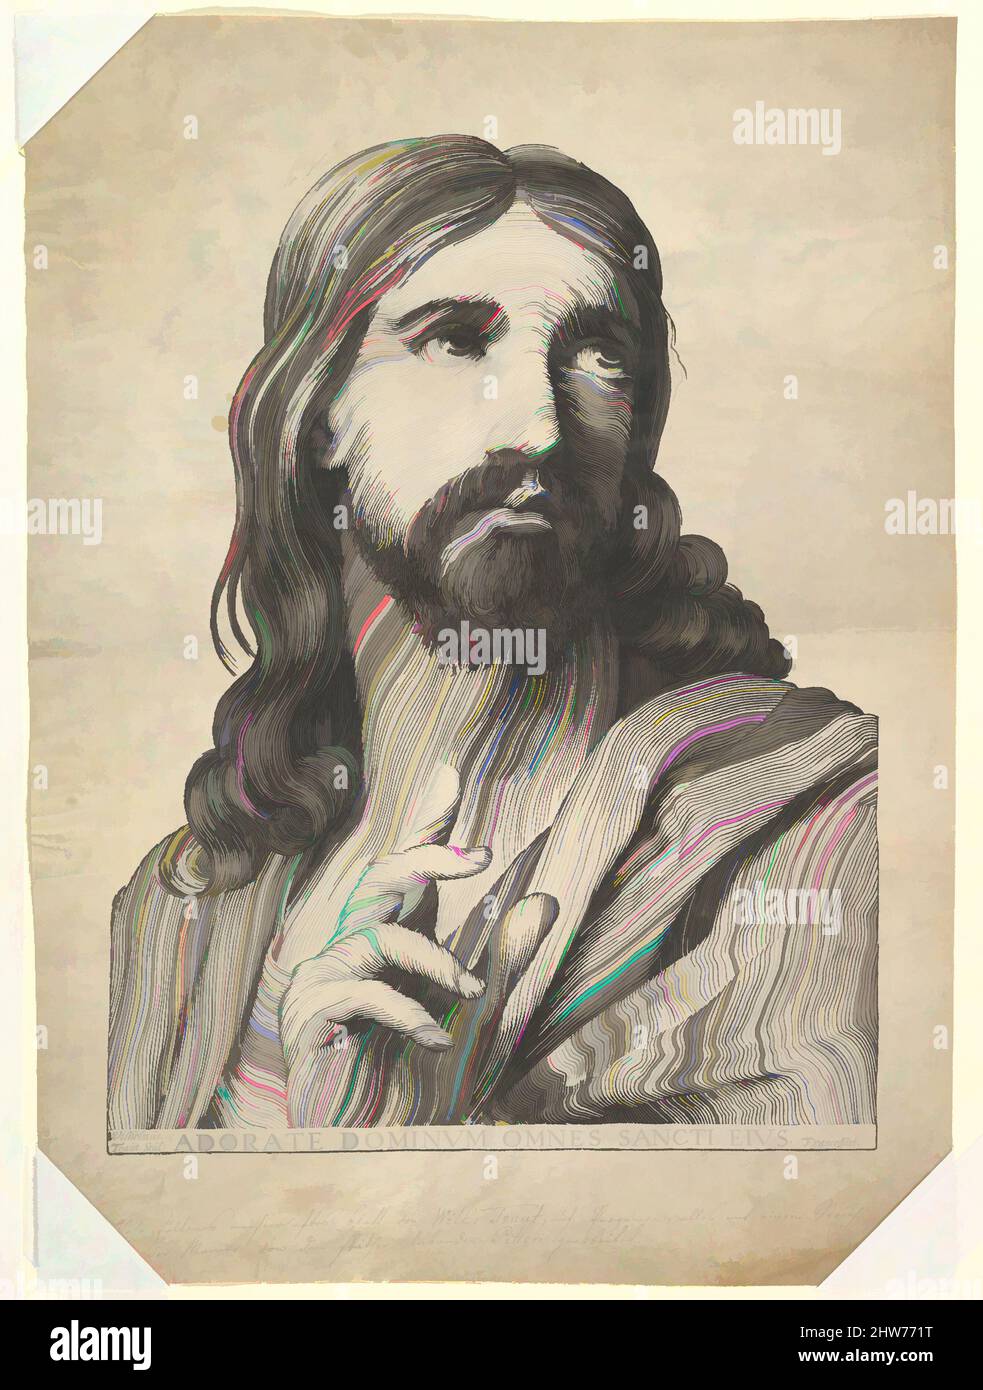 Art inspired by Bust of Christ Blessing, 17th century, Woodcut on vellum, sheet: 19 11/16 x 14 7/16 in. (50 x 36.6 cm), Prints, Wilhelm Traut (German, died 1662 Frankfurt), After Claude Mellan (French, Abbeville 1598–1688 Paris, Classic works modernized by Artotop with a splash of modernity. Shapes, color and value, eye-catching visual impact on art. Emotions through freedom of artworks in a contemporary way. A timeless message pursuing a wildly creative new direction. Artists turning to the digital medium and creating the Artotop NFT Stock Photo